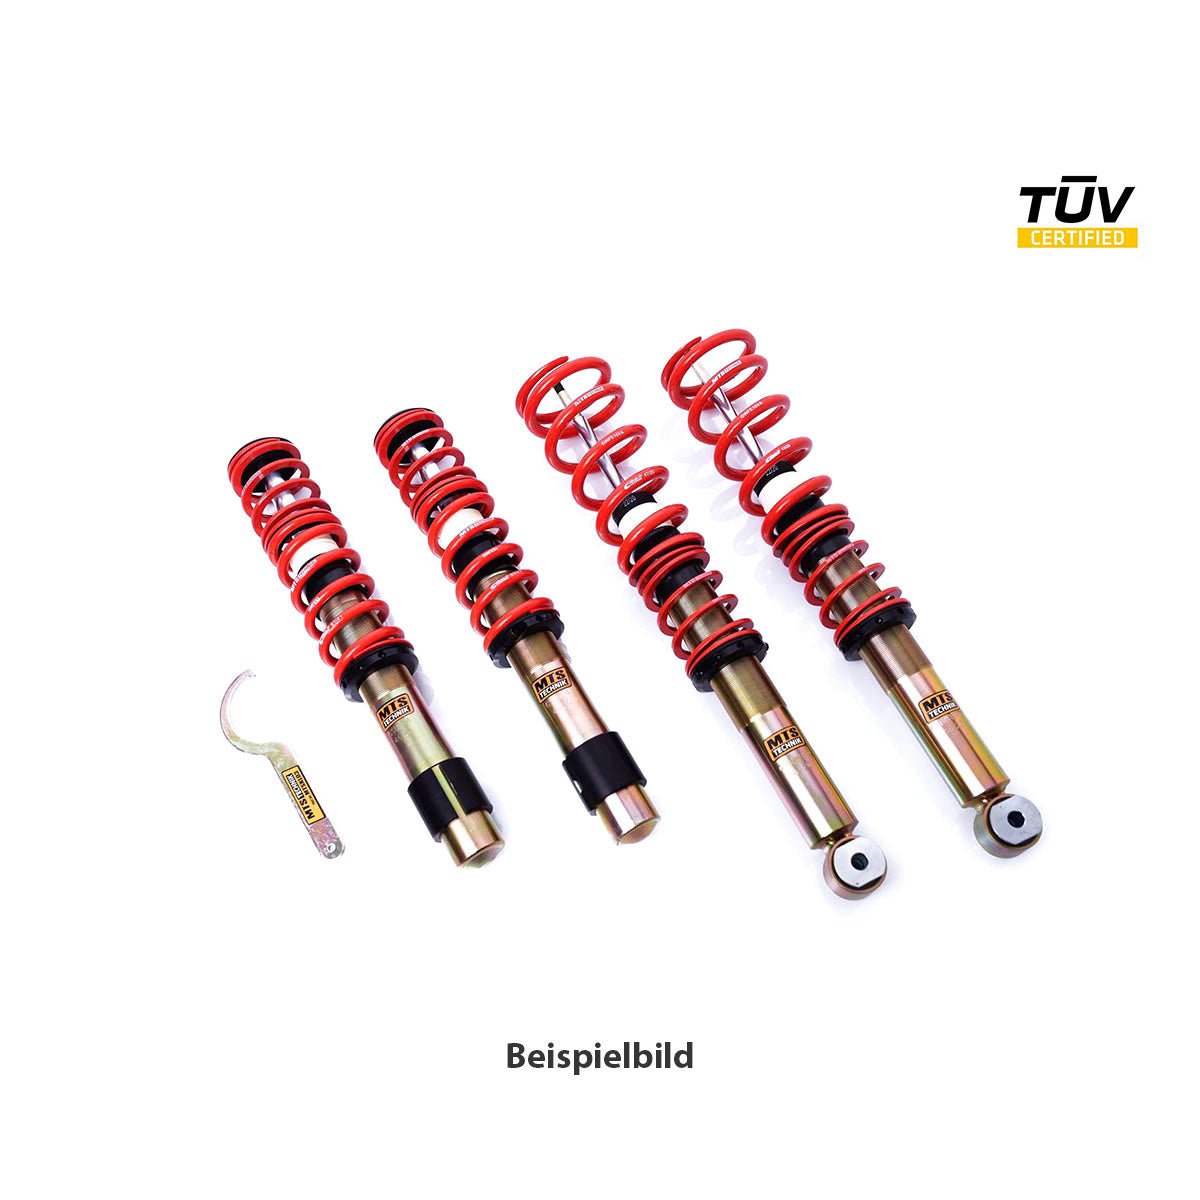 MTS TECHNIK coilover kit SPORT BMW E34 Touring (with TÜV) - PARTS33 GmbH